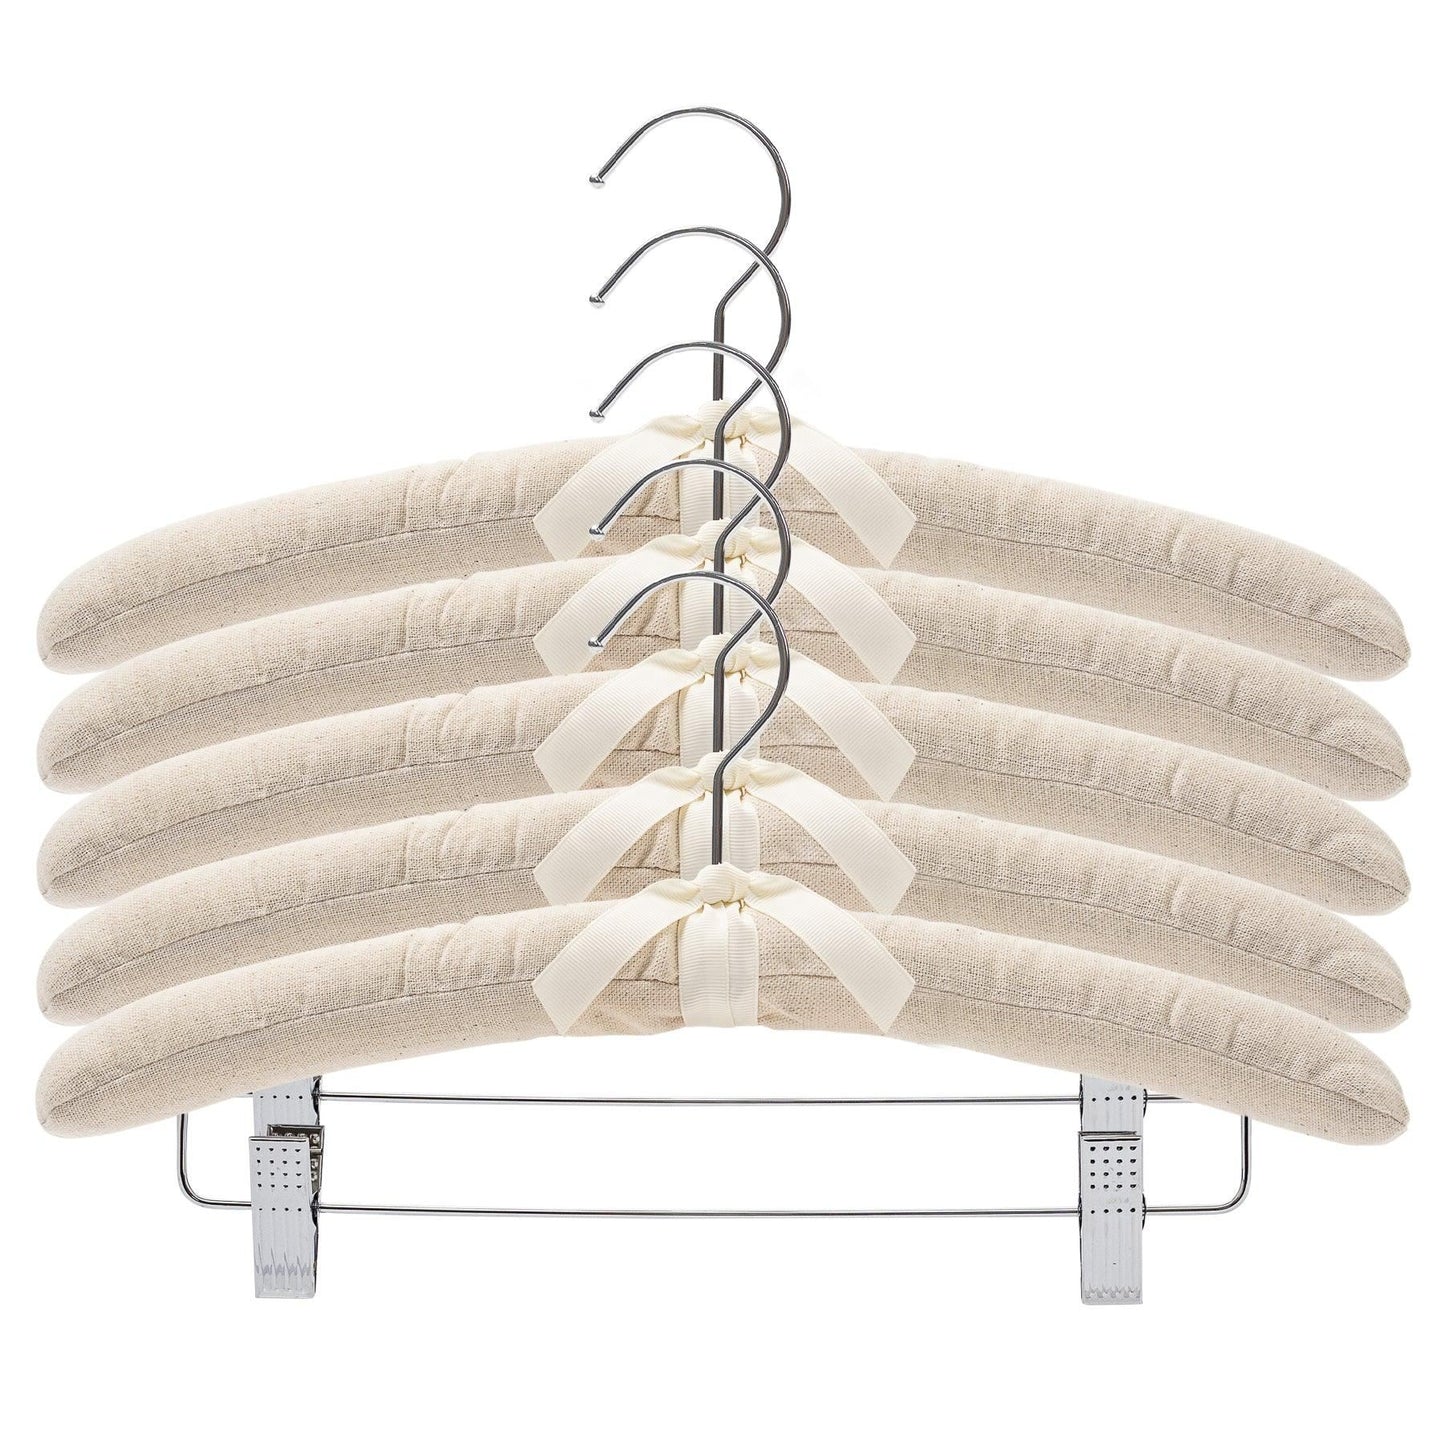 Padded Coat Hangers With Chrome Hook & Clips - Natural Canvas - 38cm X 45mm Thick (Sold in Bundles of 25/50) - Hangersforless